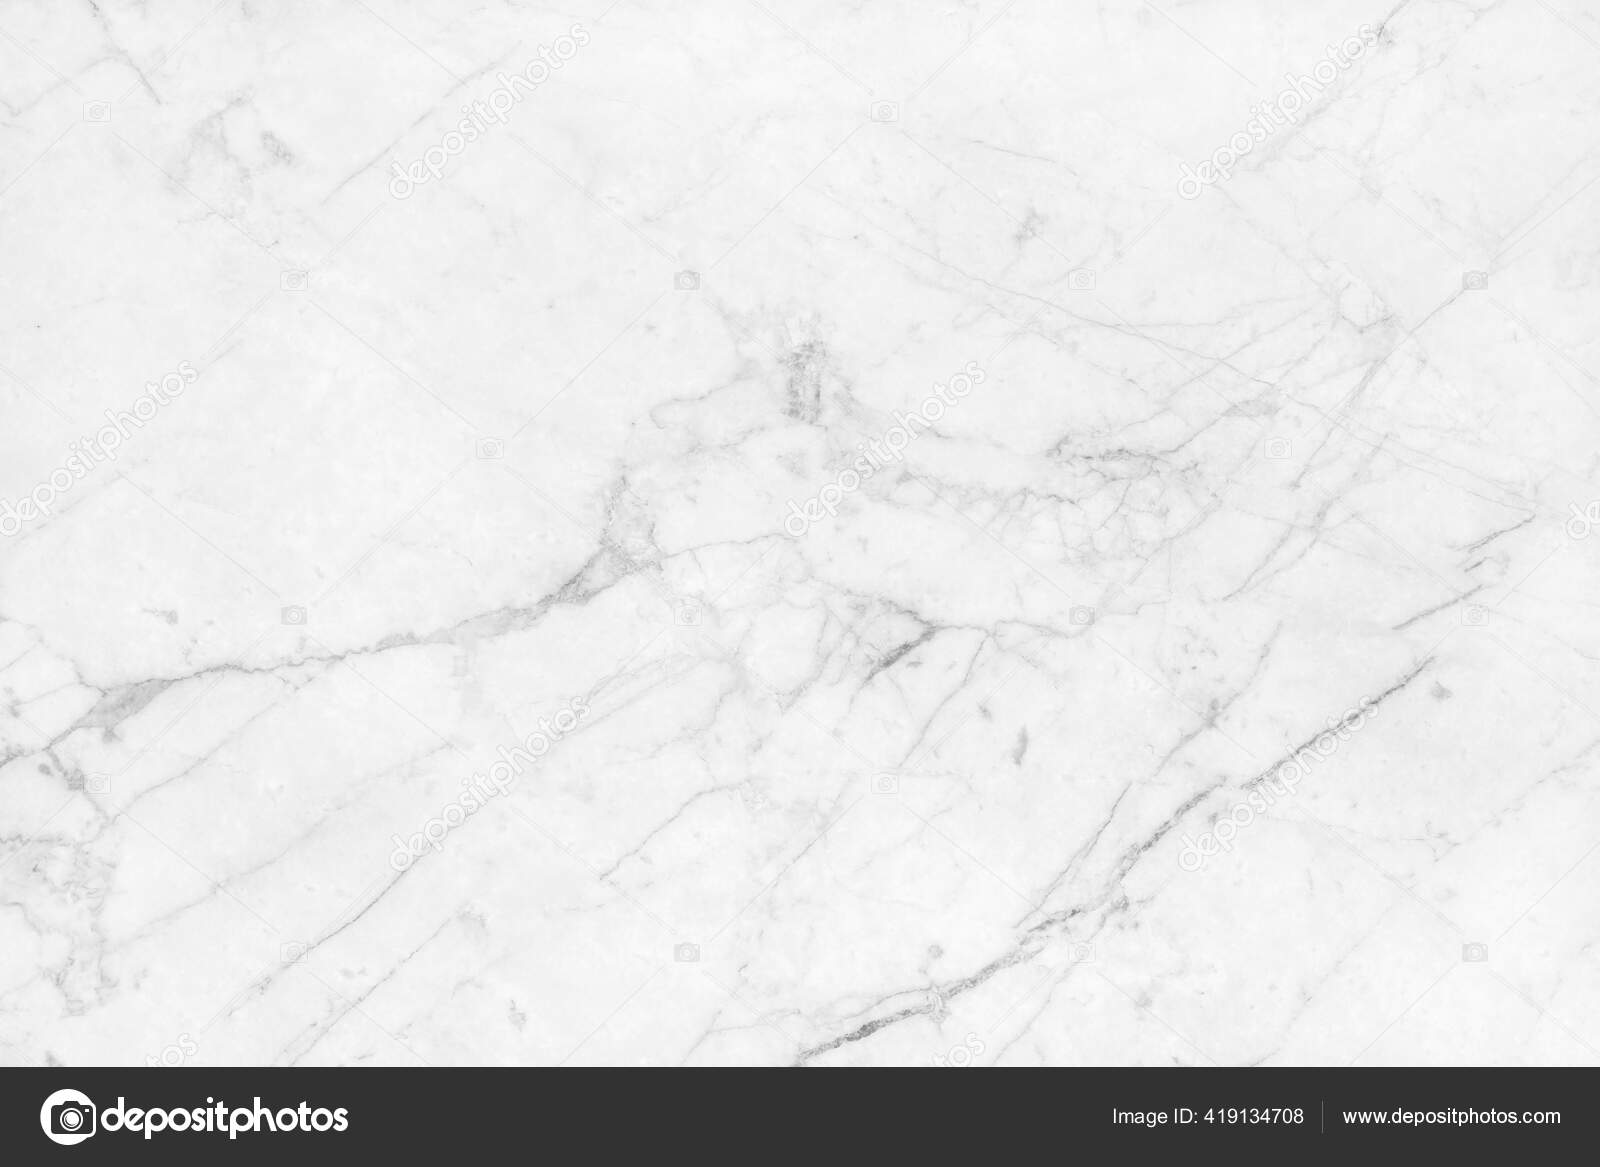 White Grey Marble Texture Background Natural Pattern High Resolution Tiles Stock Photo By Natthanim99 419134708